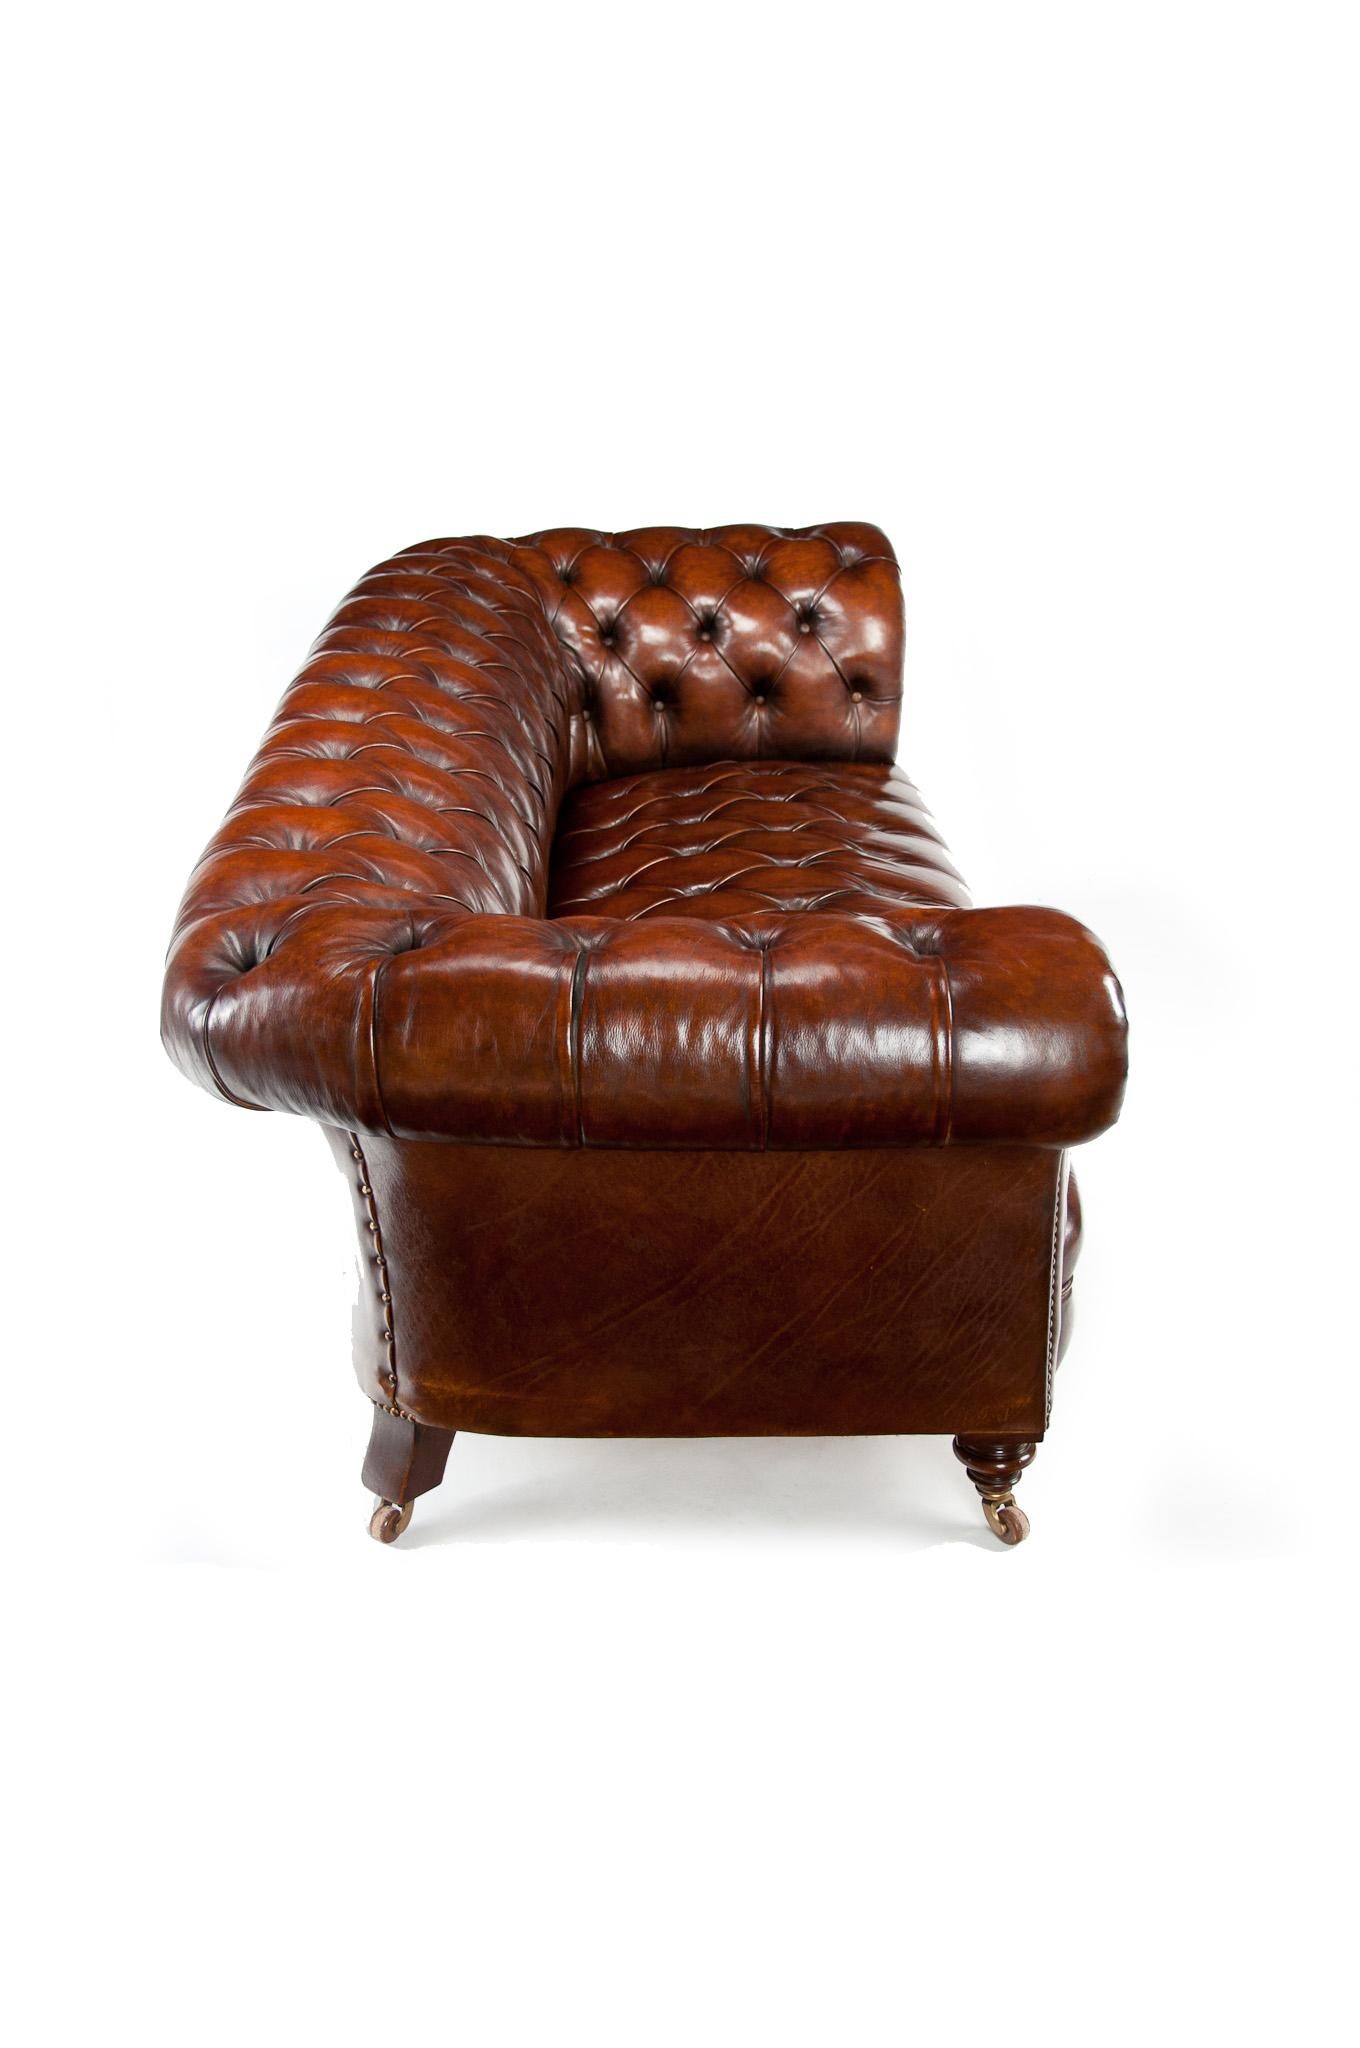 Wonderful 19th Century Deep Buttoned Leather Chesterfield by James Shoolbred 6